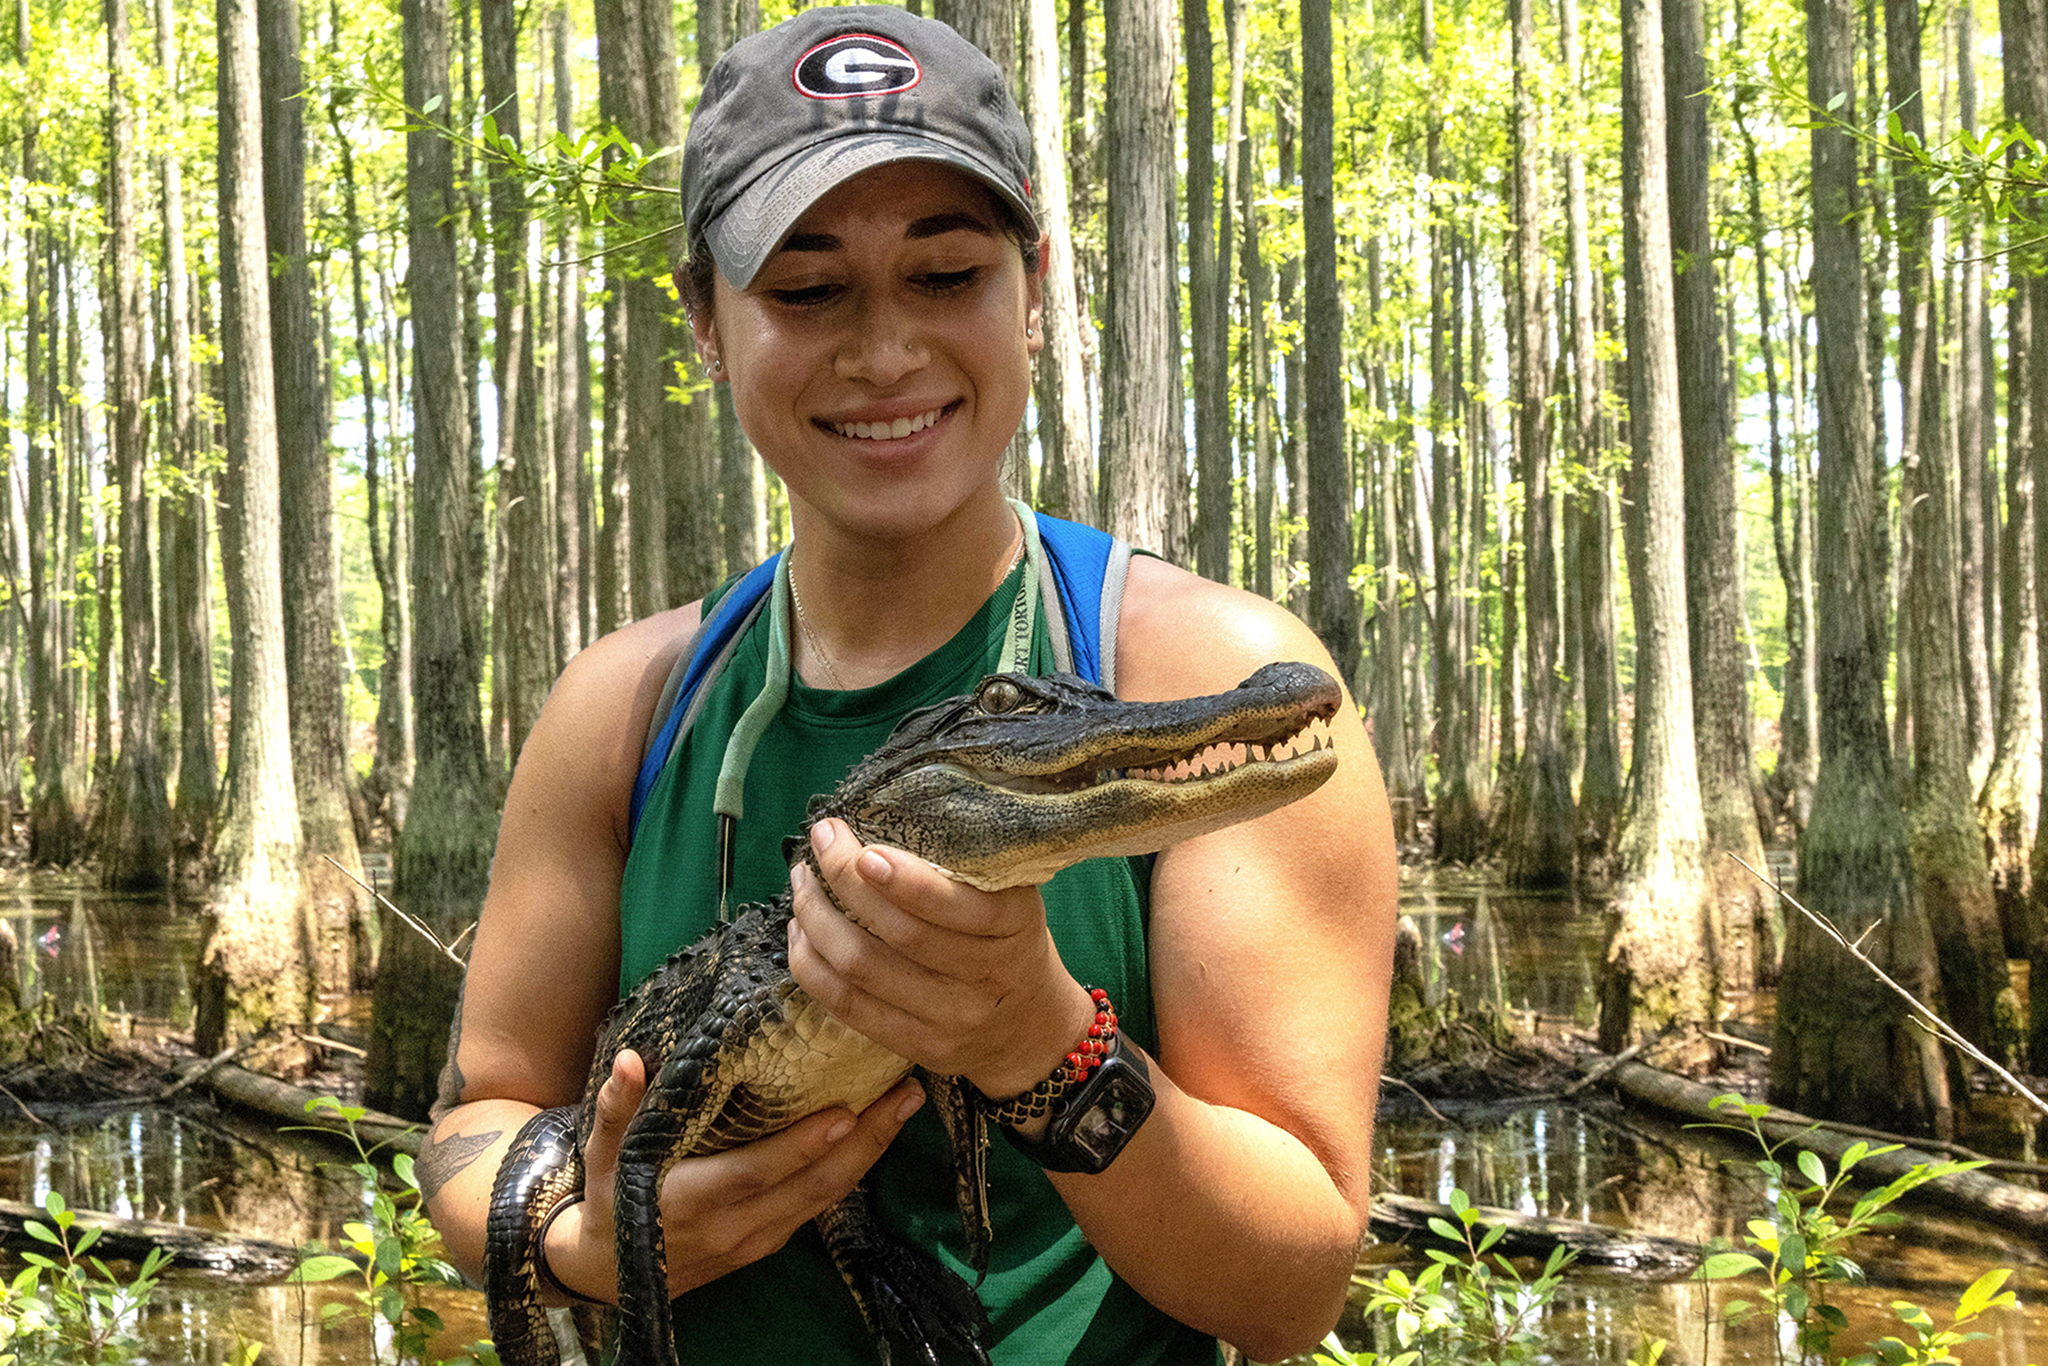 Kojima earned her undergraduate degree at University of California, Davis, where she managed a turtle project as an intern in UGA alumnus Brian Todd’s research lab. After earning her degree, she worked a six-month position with the U.S. Geological Survey on a garter snake project in California before coming to UGA for graduate school.